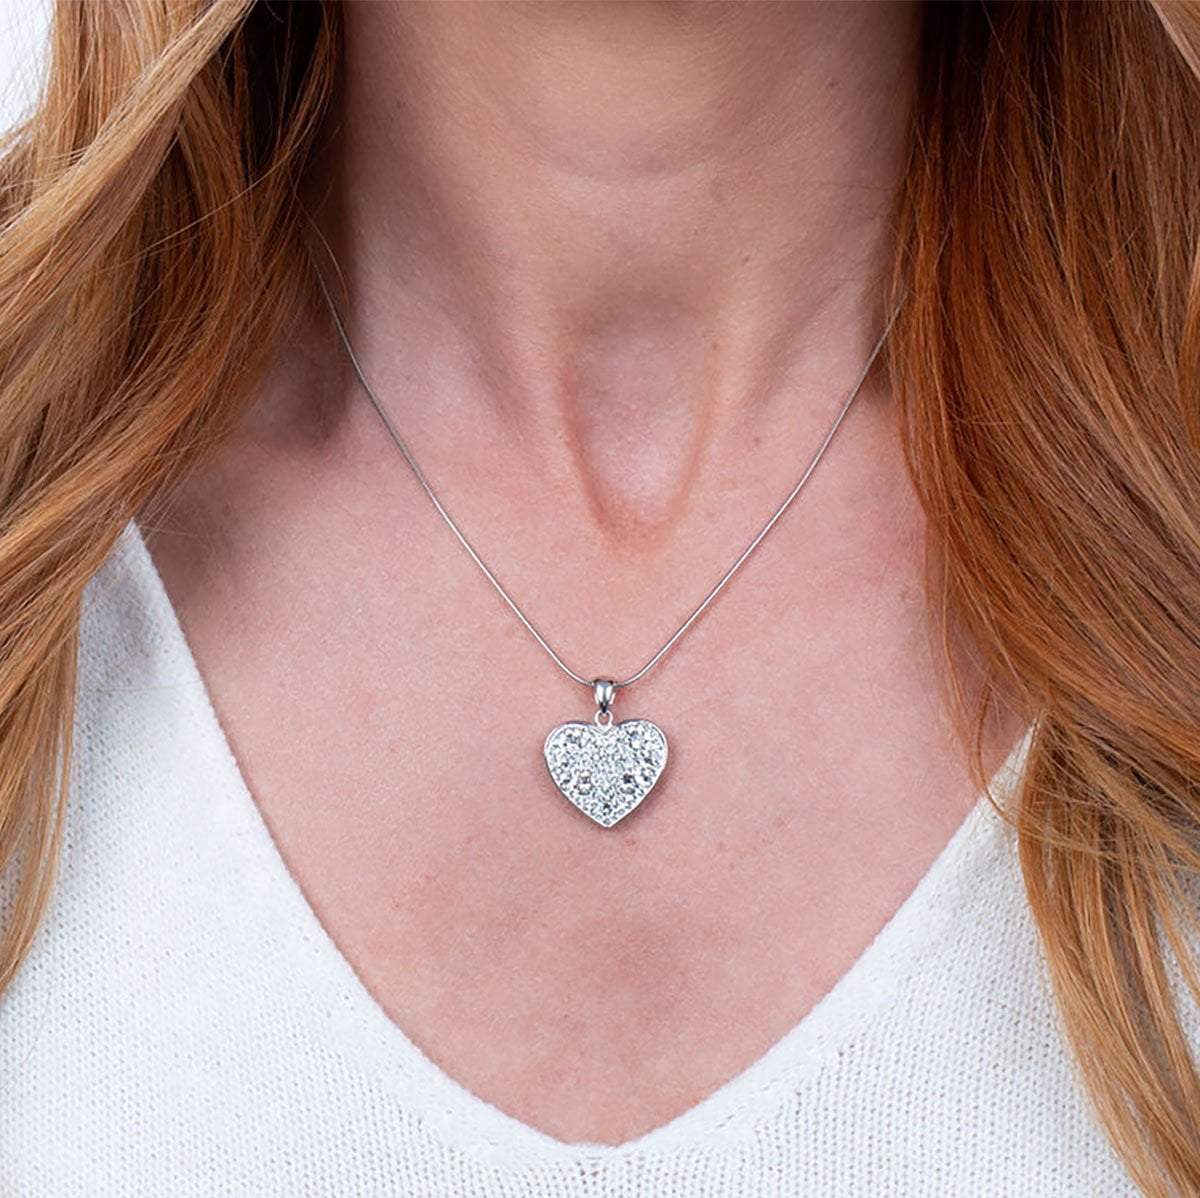 Swarovski Crystal Heart Pendant in Sterling Silver Pendant + Chain Crystal Collection Roma Designer Jewelry